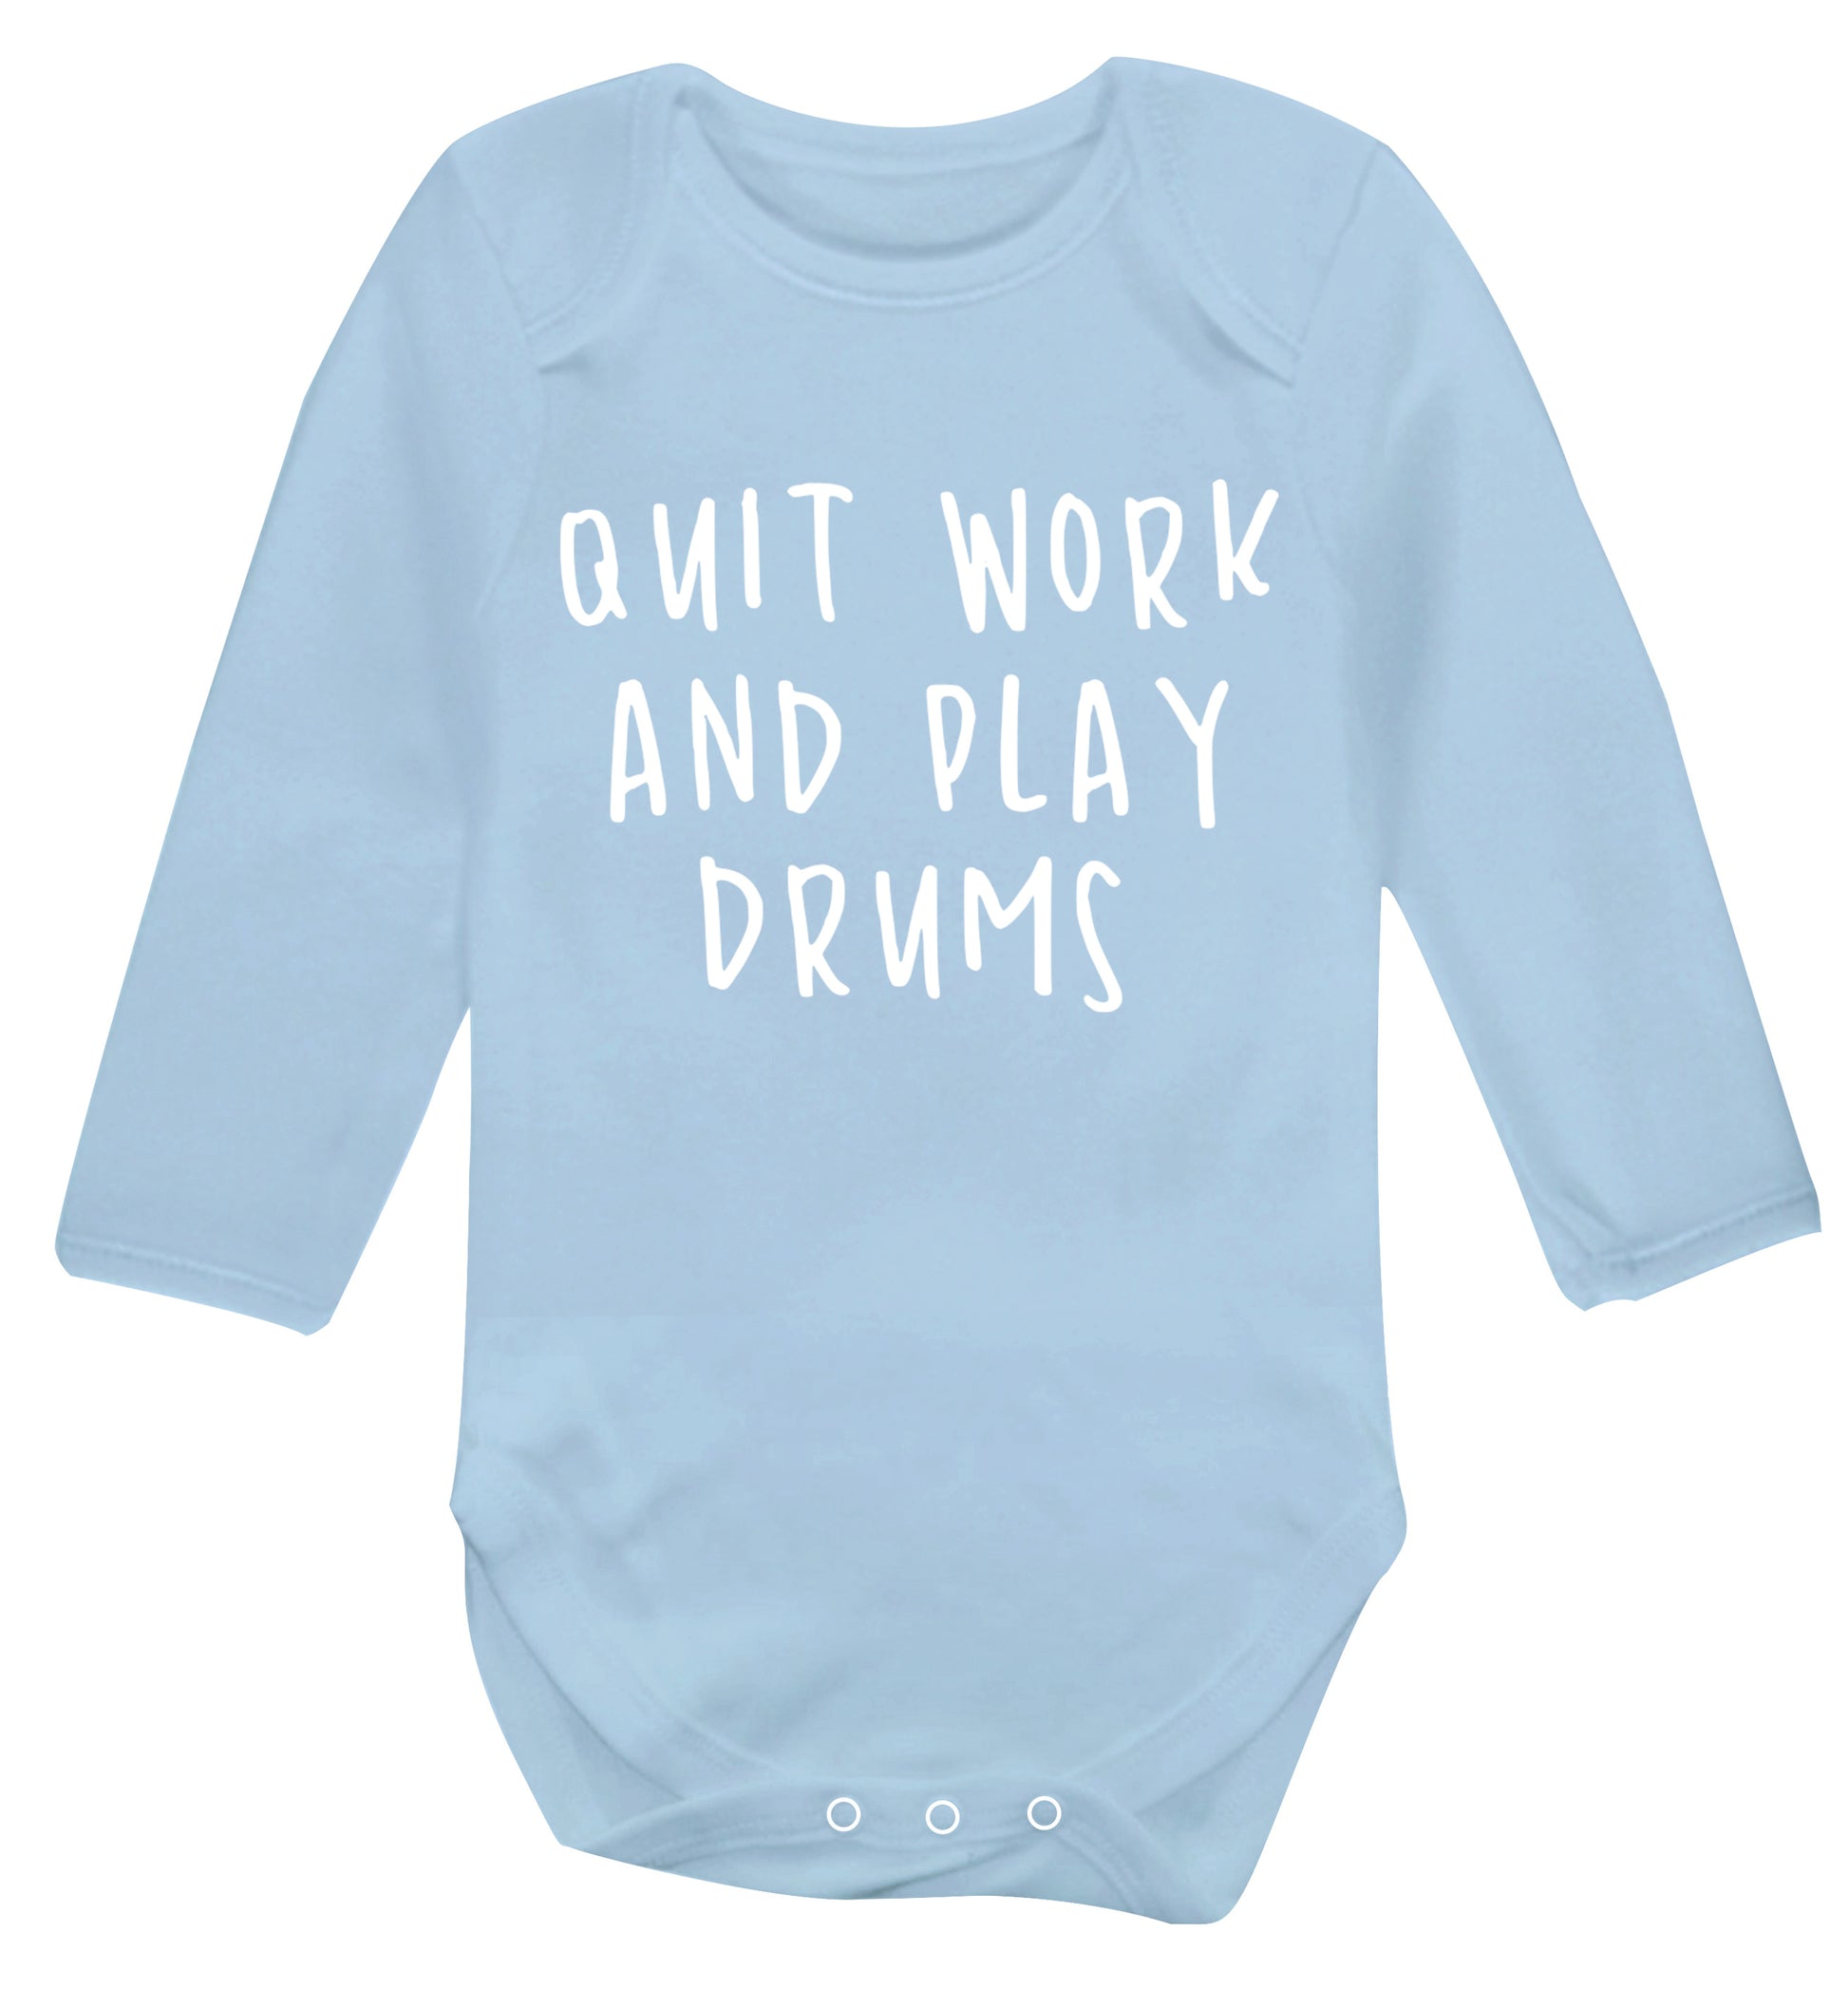 Quit work and play drums Baby Vest long sleeved pale blue 6-12 months